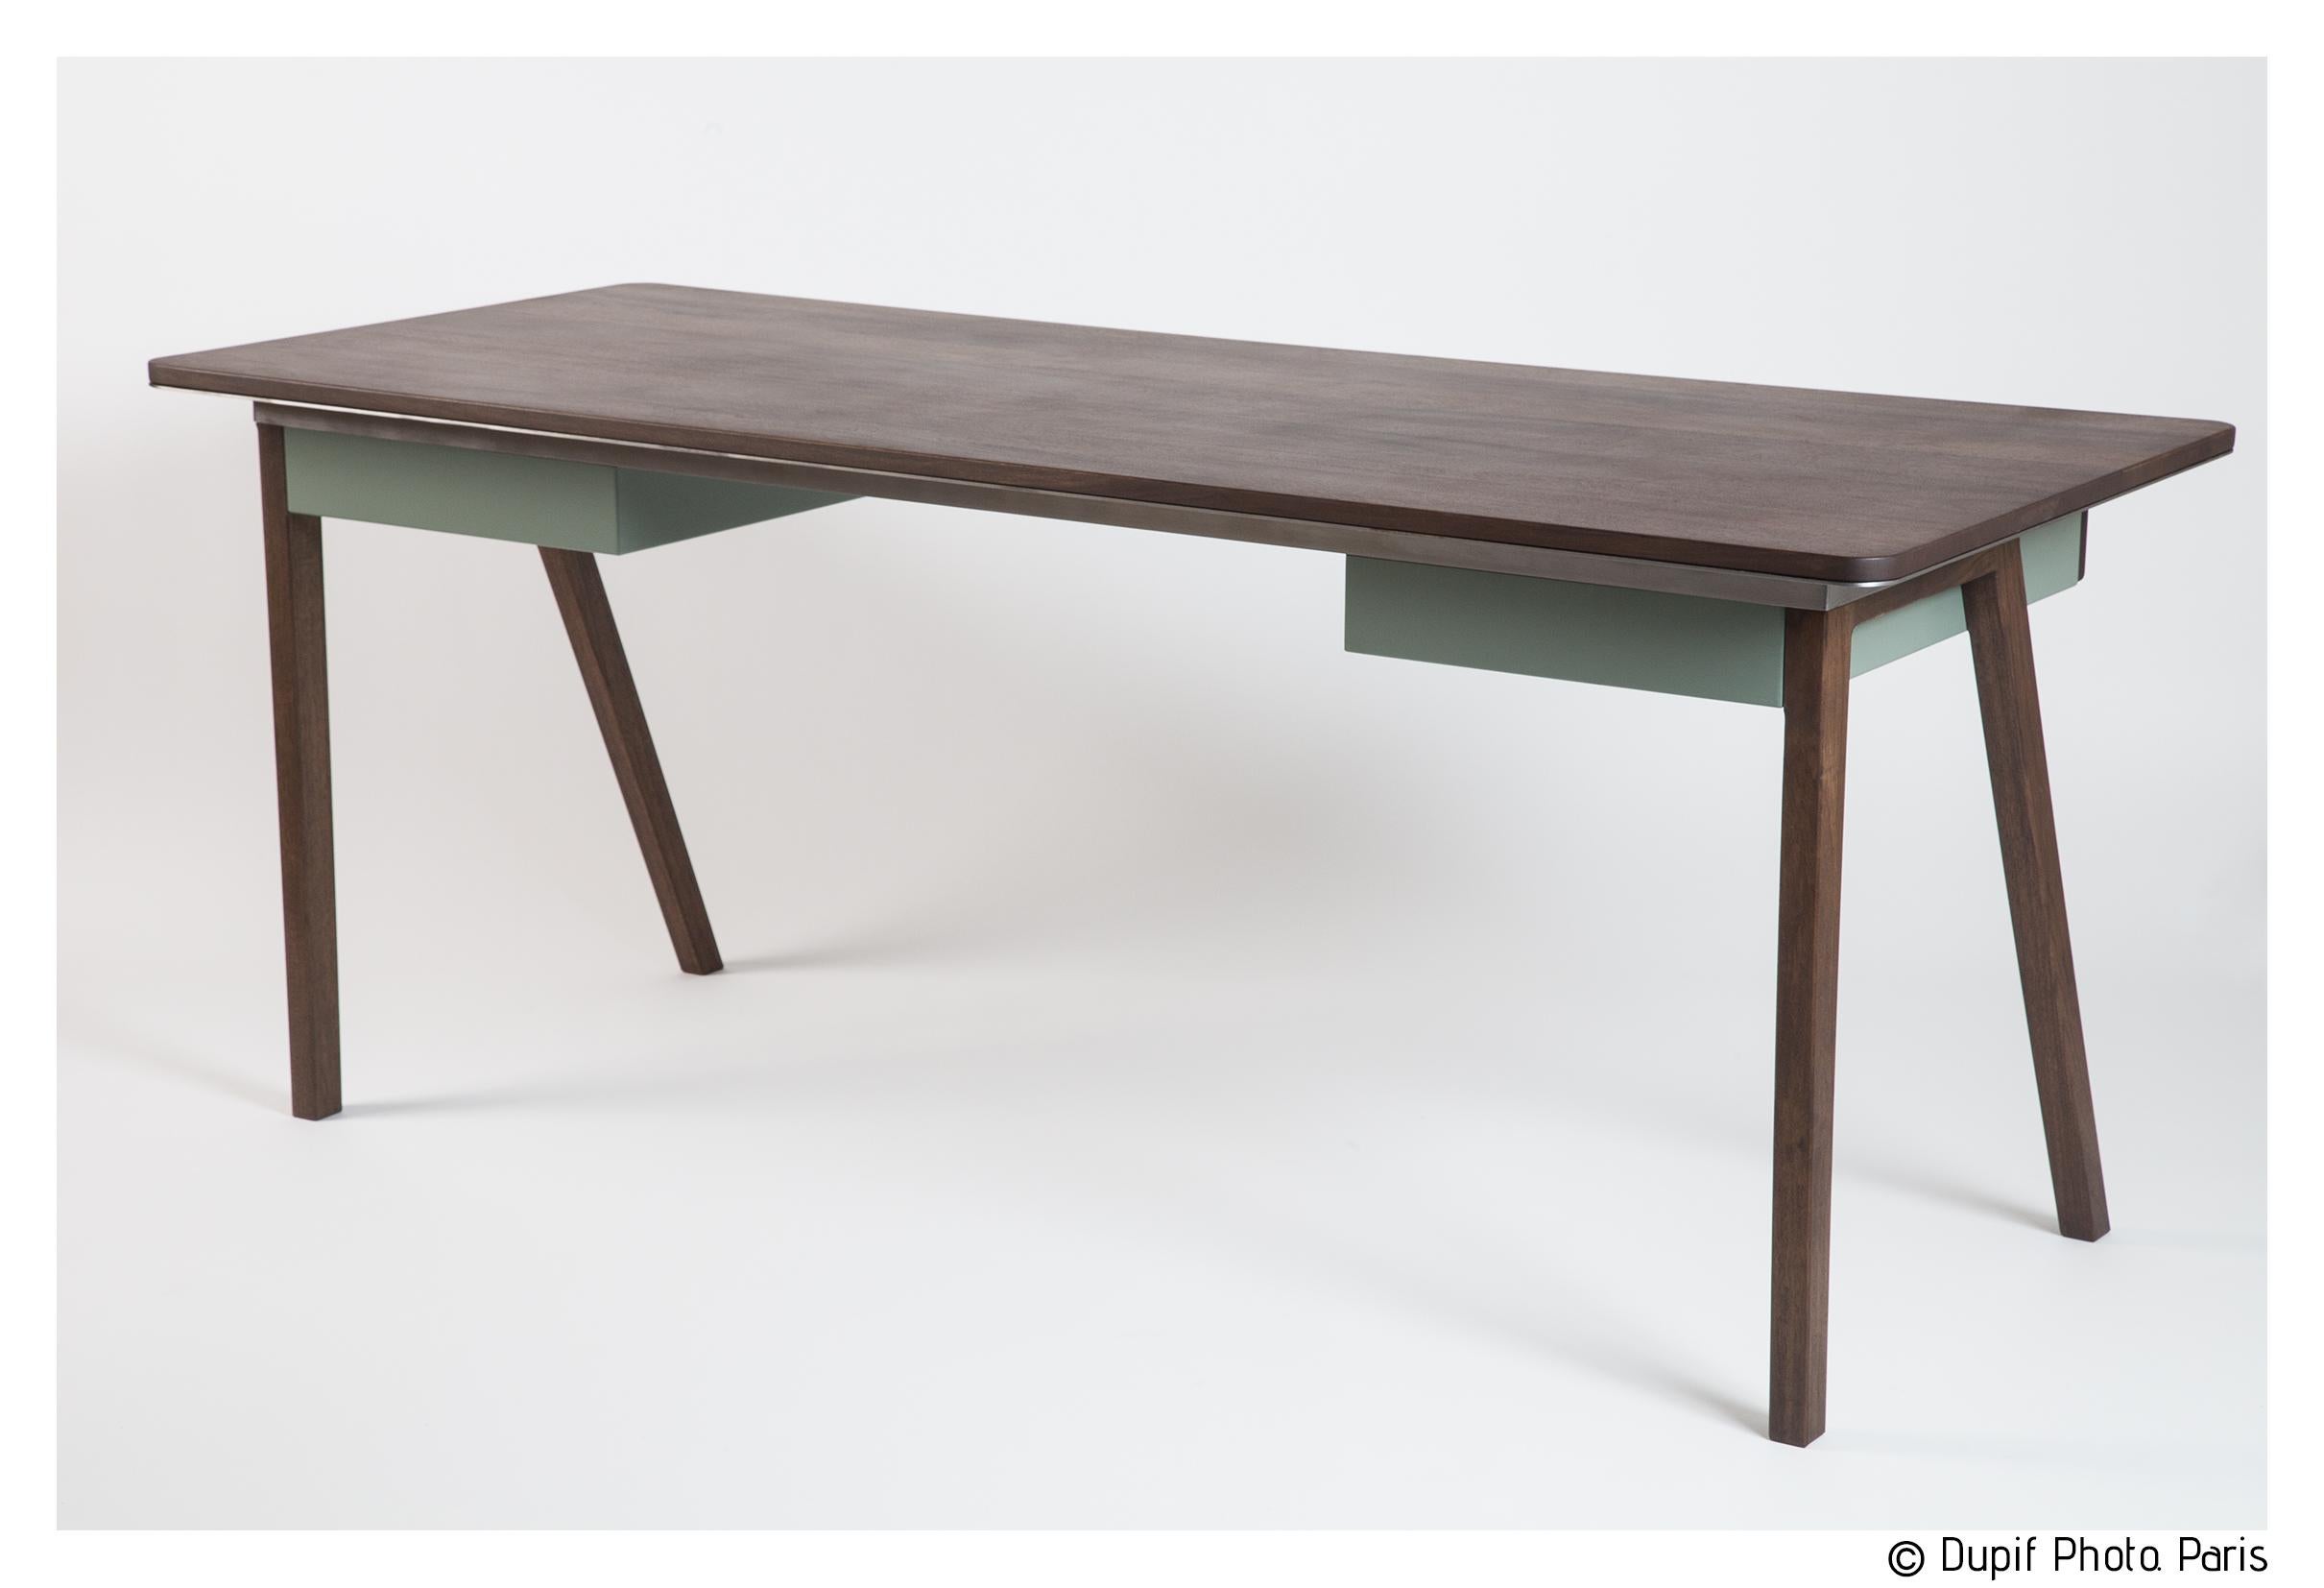 Sleek contemporary French walnut desk designed and created by Barnabé Richard as part of the Jean collection, paying tribute to Jean Prouvé. The design is decidedly modern. Handcrafted in France, the creator has chosen smooth walnut for its subtle